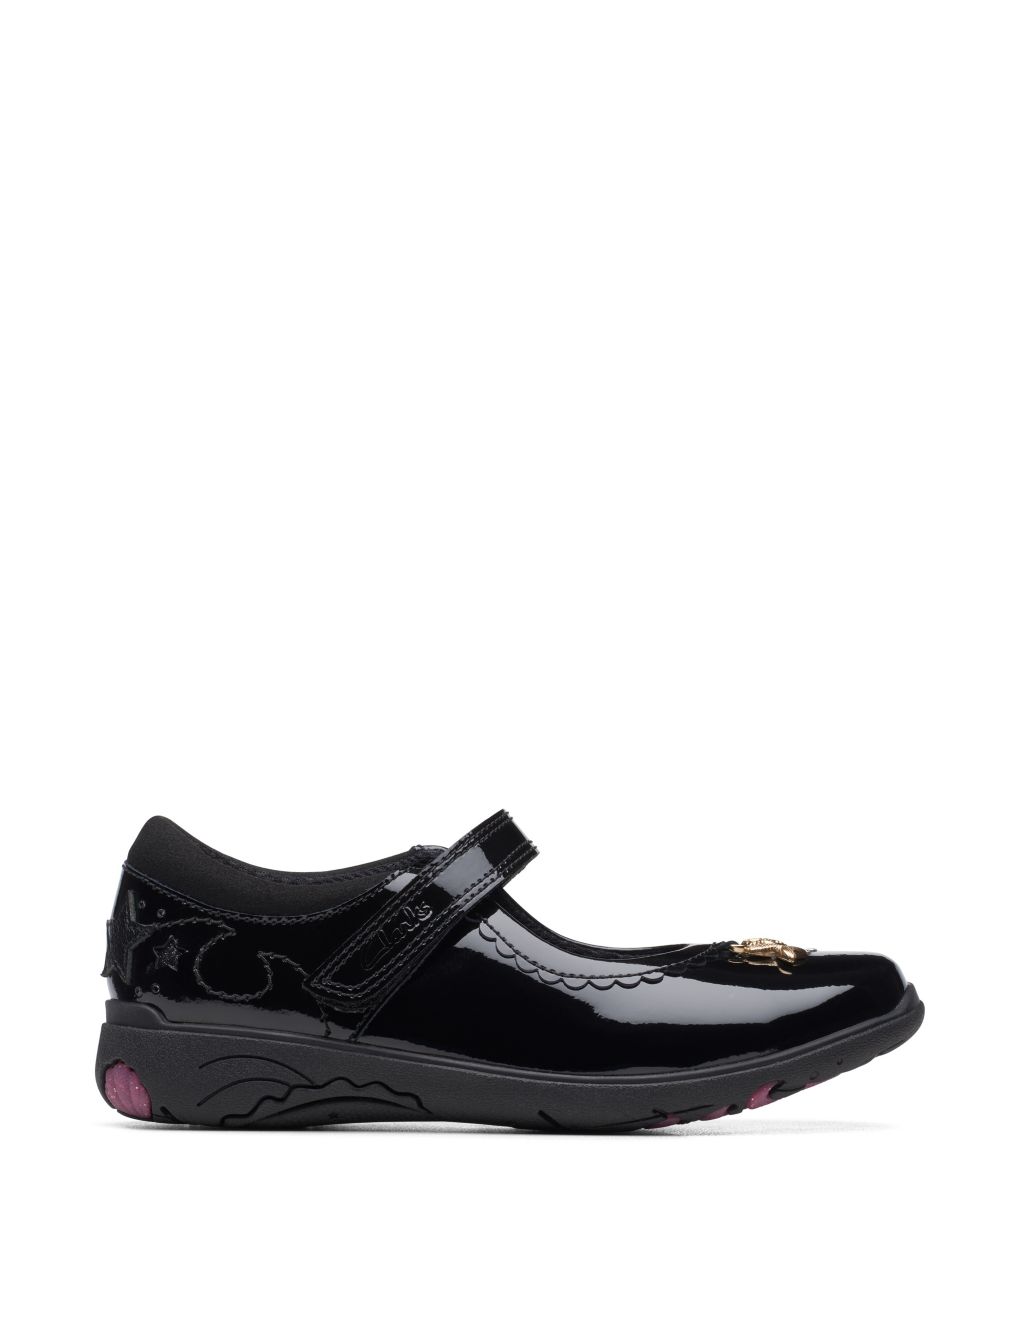 Kids' Patent Leather Mary Jane Shoes (7 Small - 2½ Large)